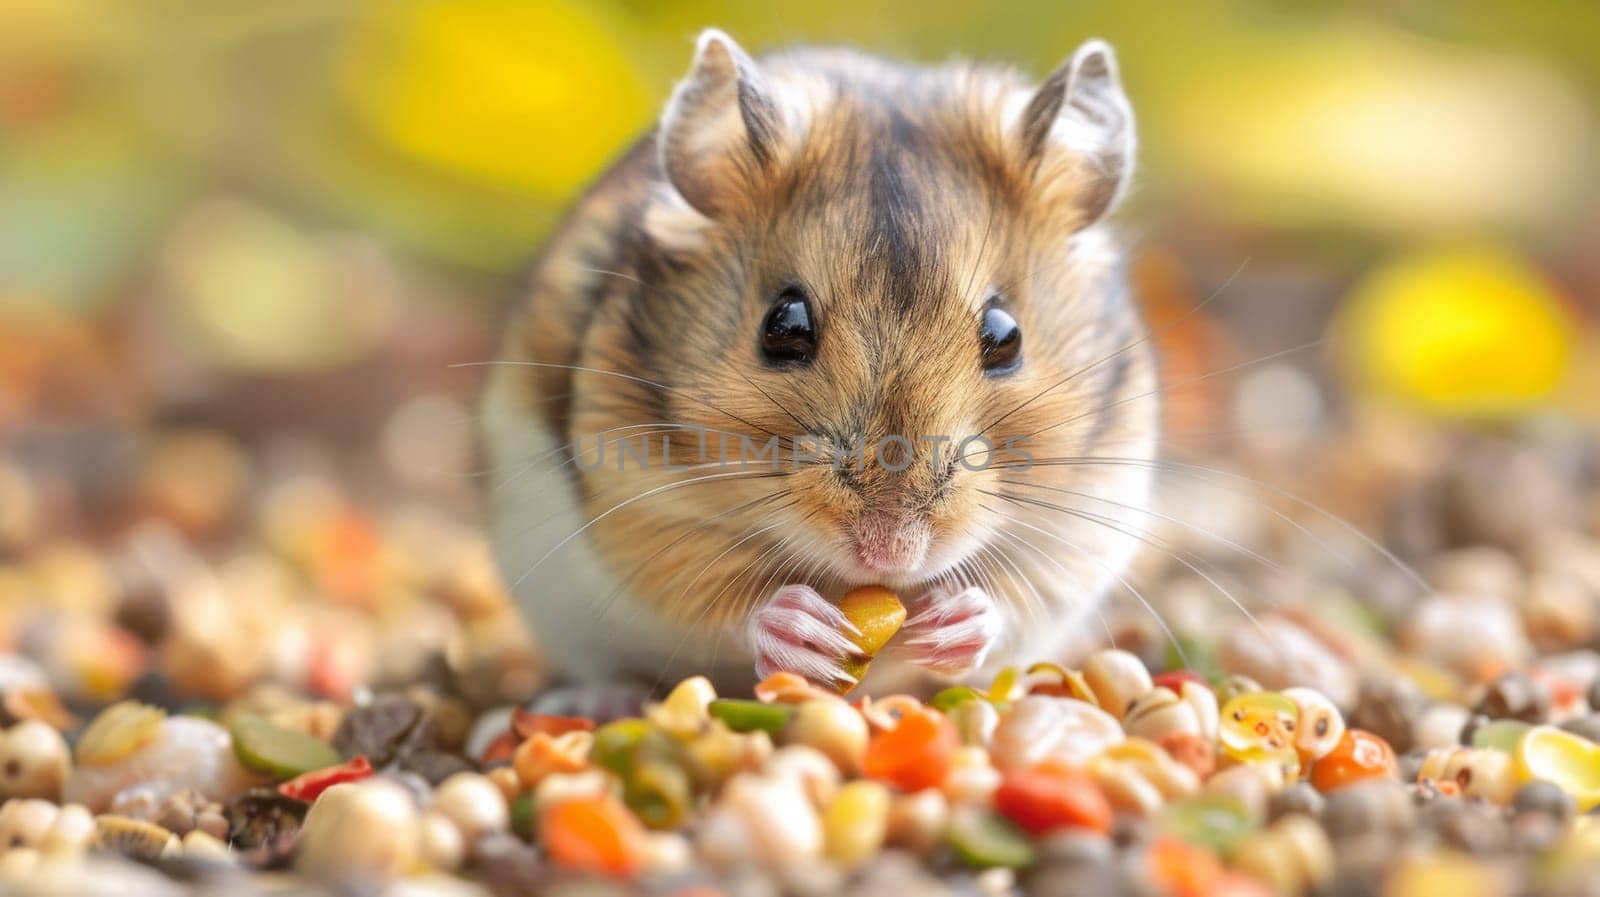 A small brown and white hamster eating food from a bowl, AI by starush